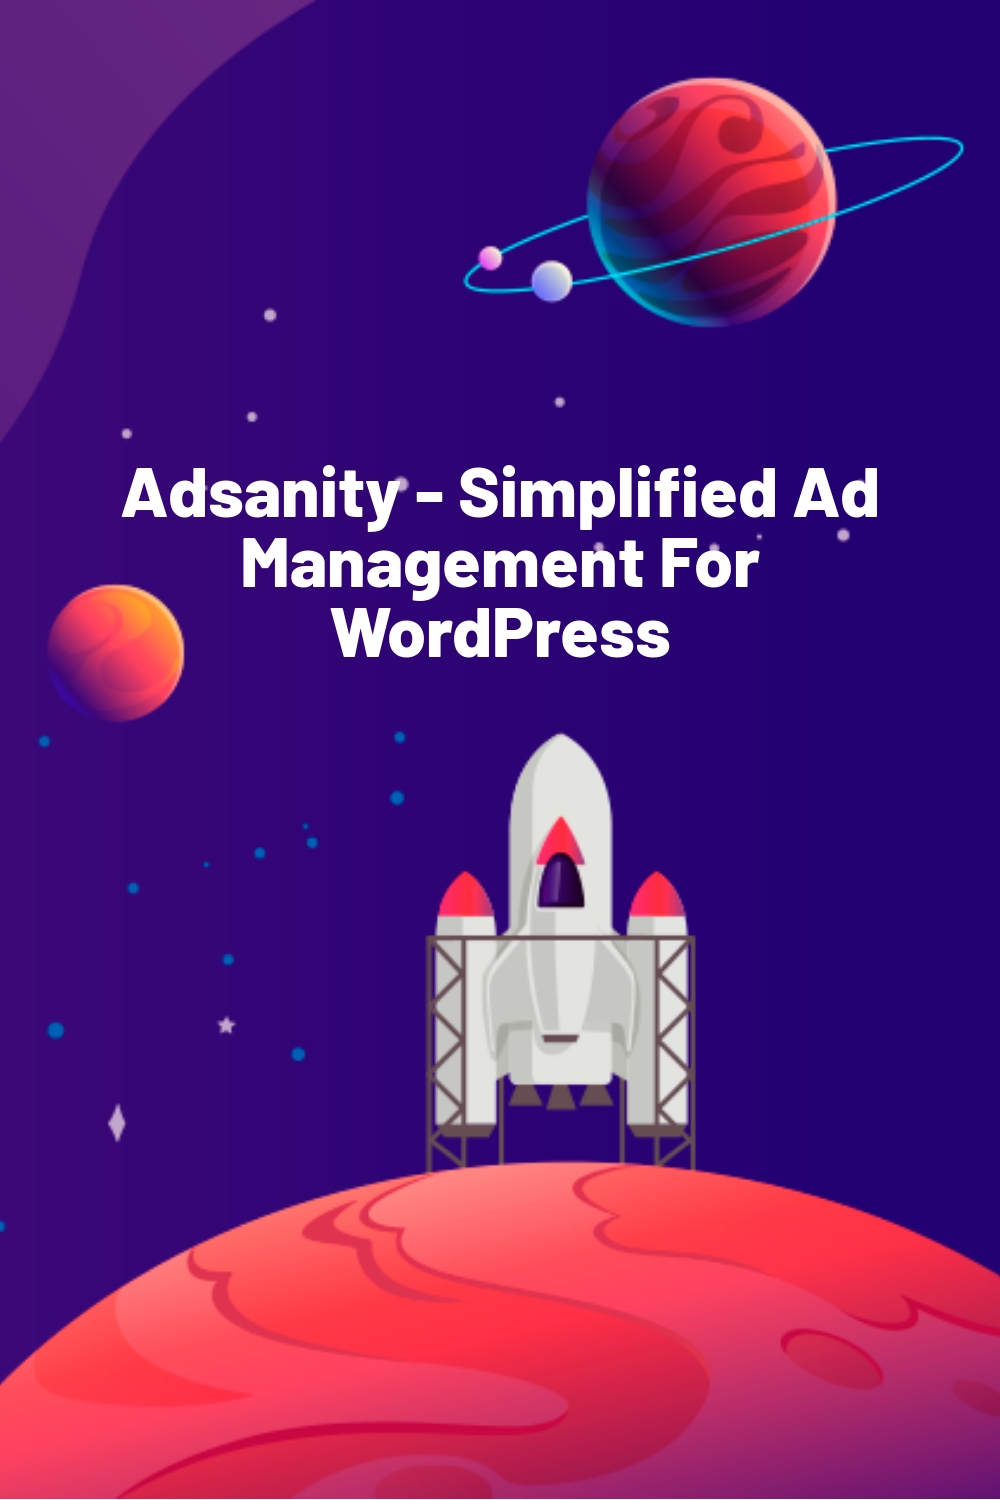 Adsanity – Simplified Ad Management For WordPress